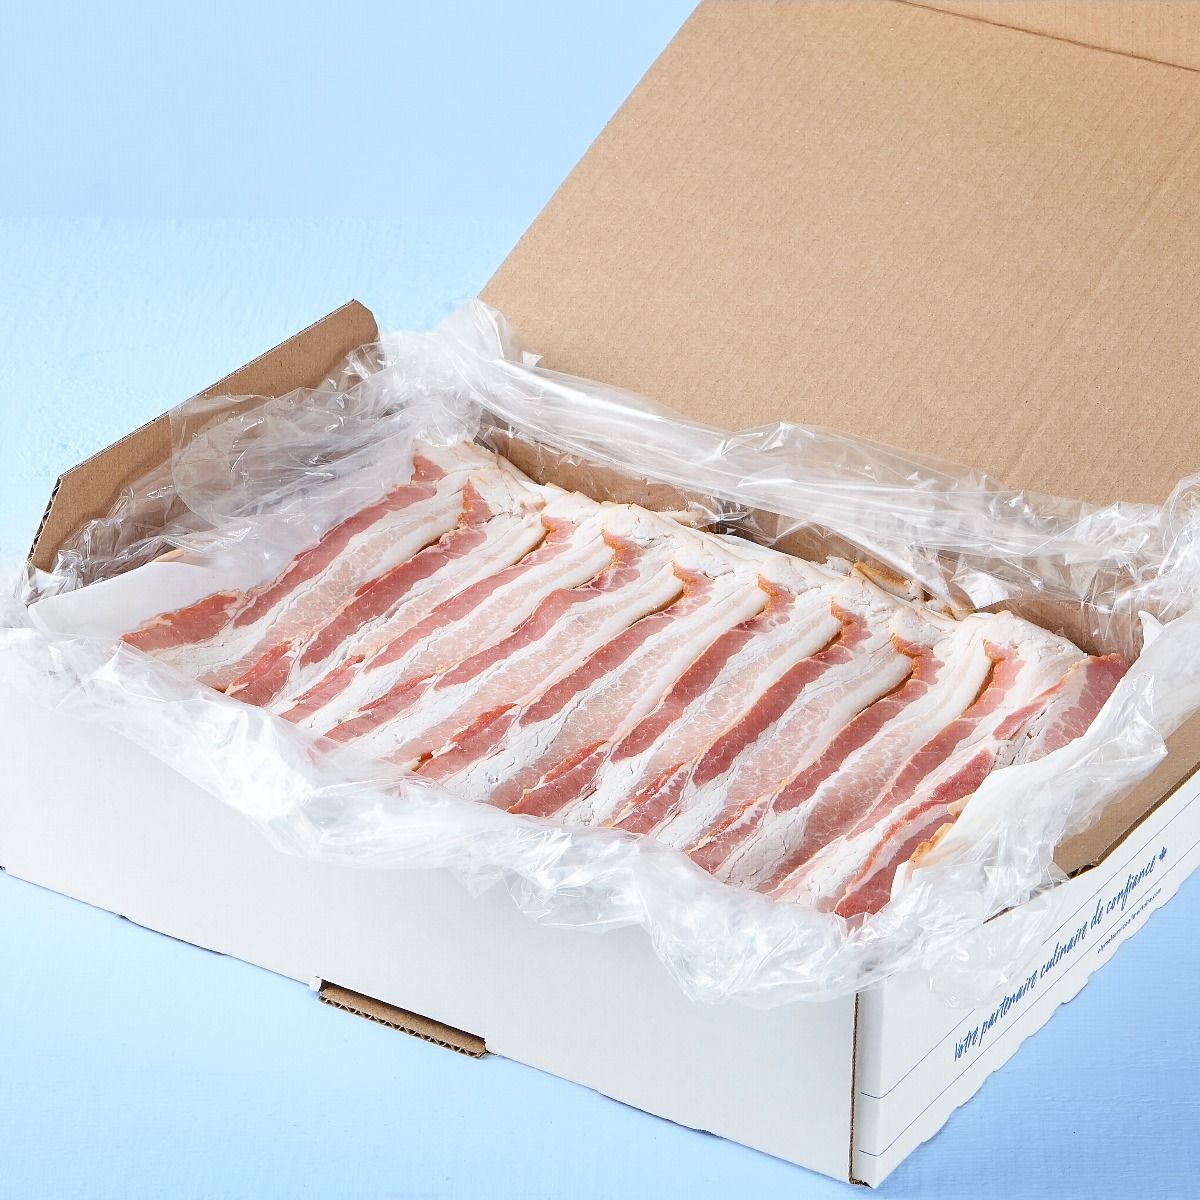 Fresh layer out sliced bacon, 20 slices / 2 '' (formerly 16-18 slices / Lb)